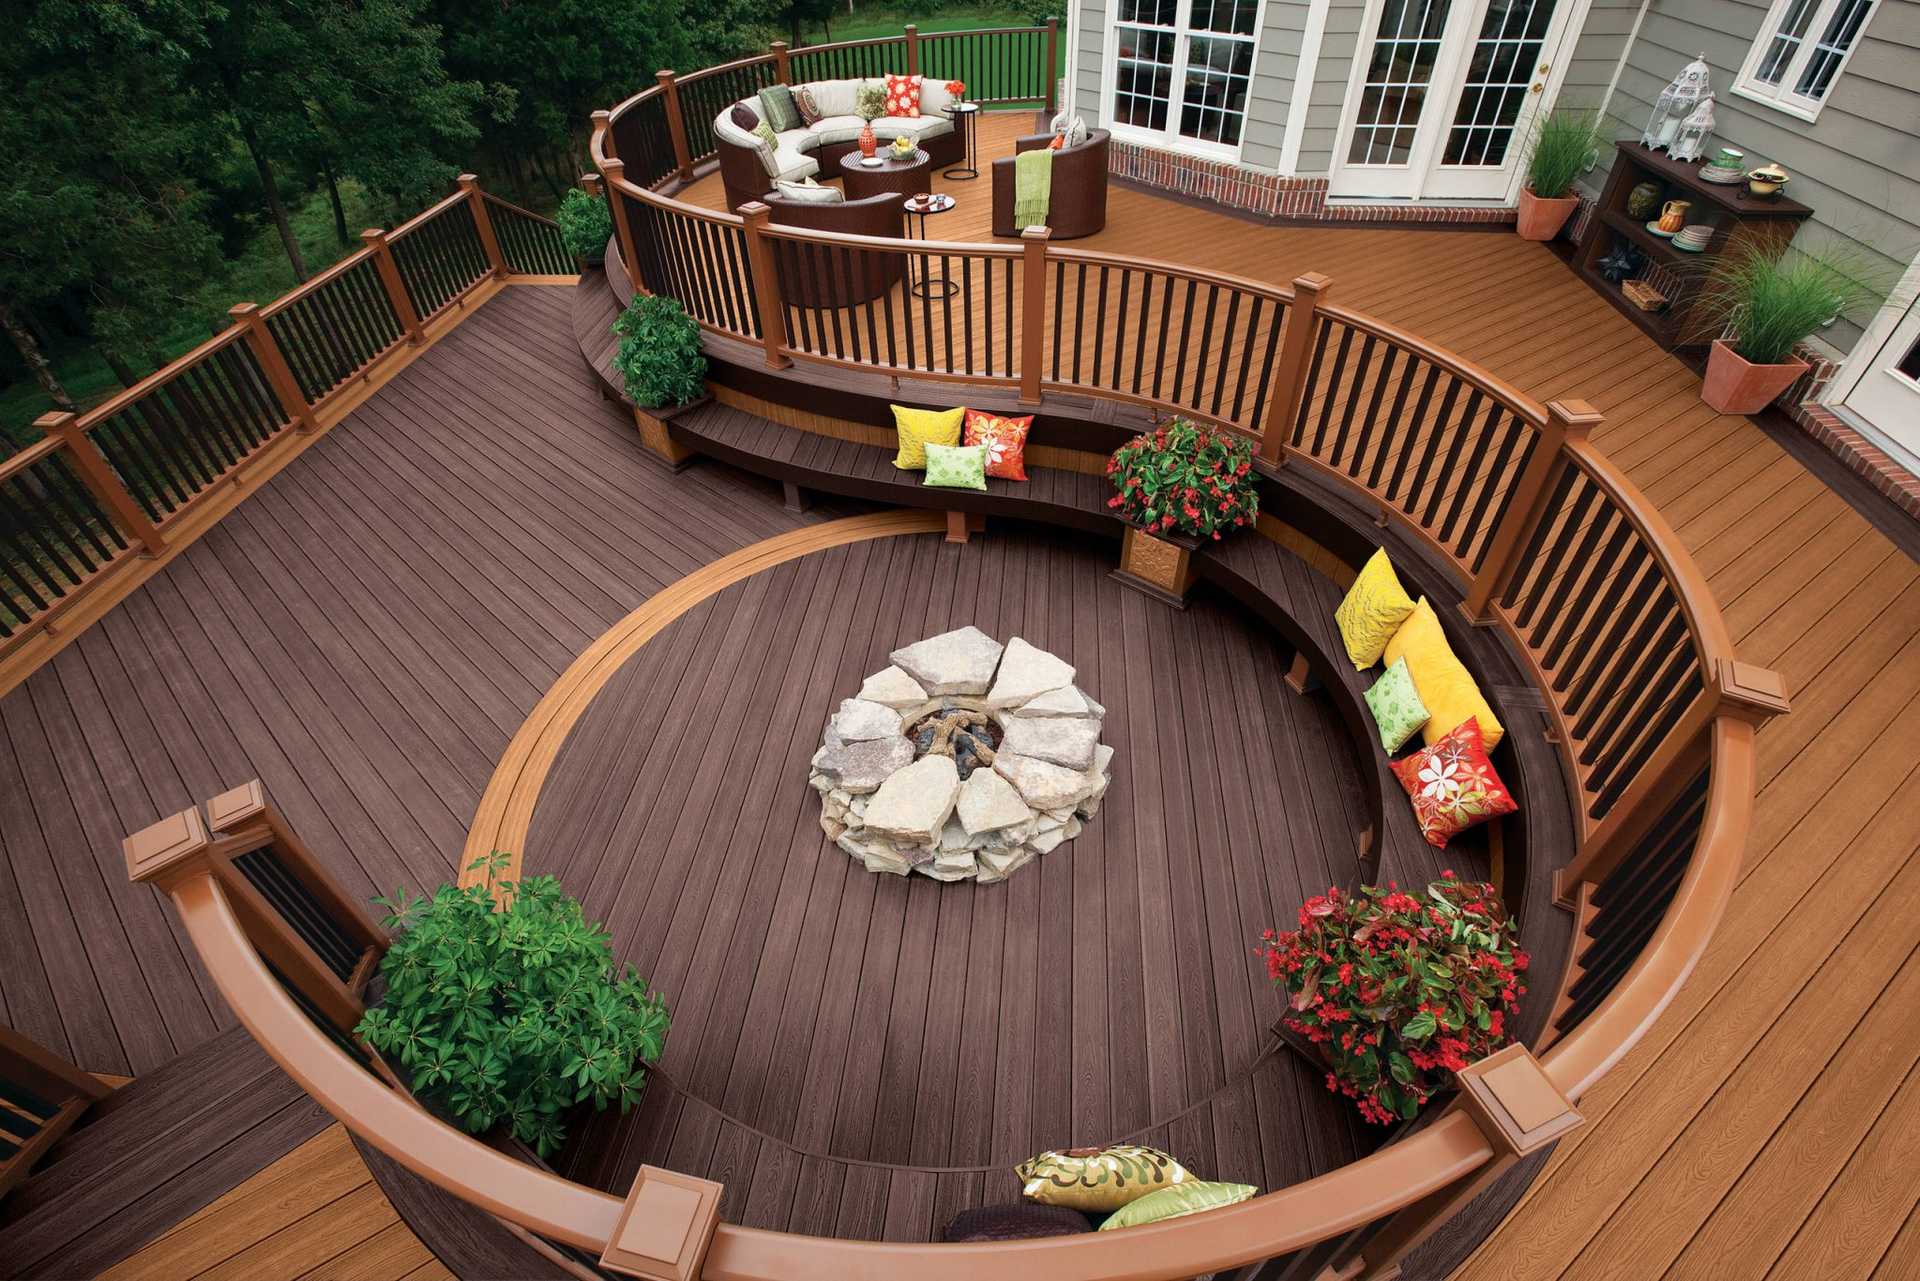 New Composite Deck Ideas in Essex County, NJ